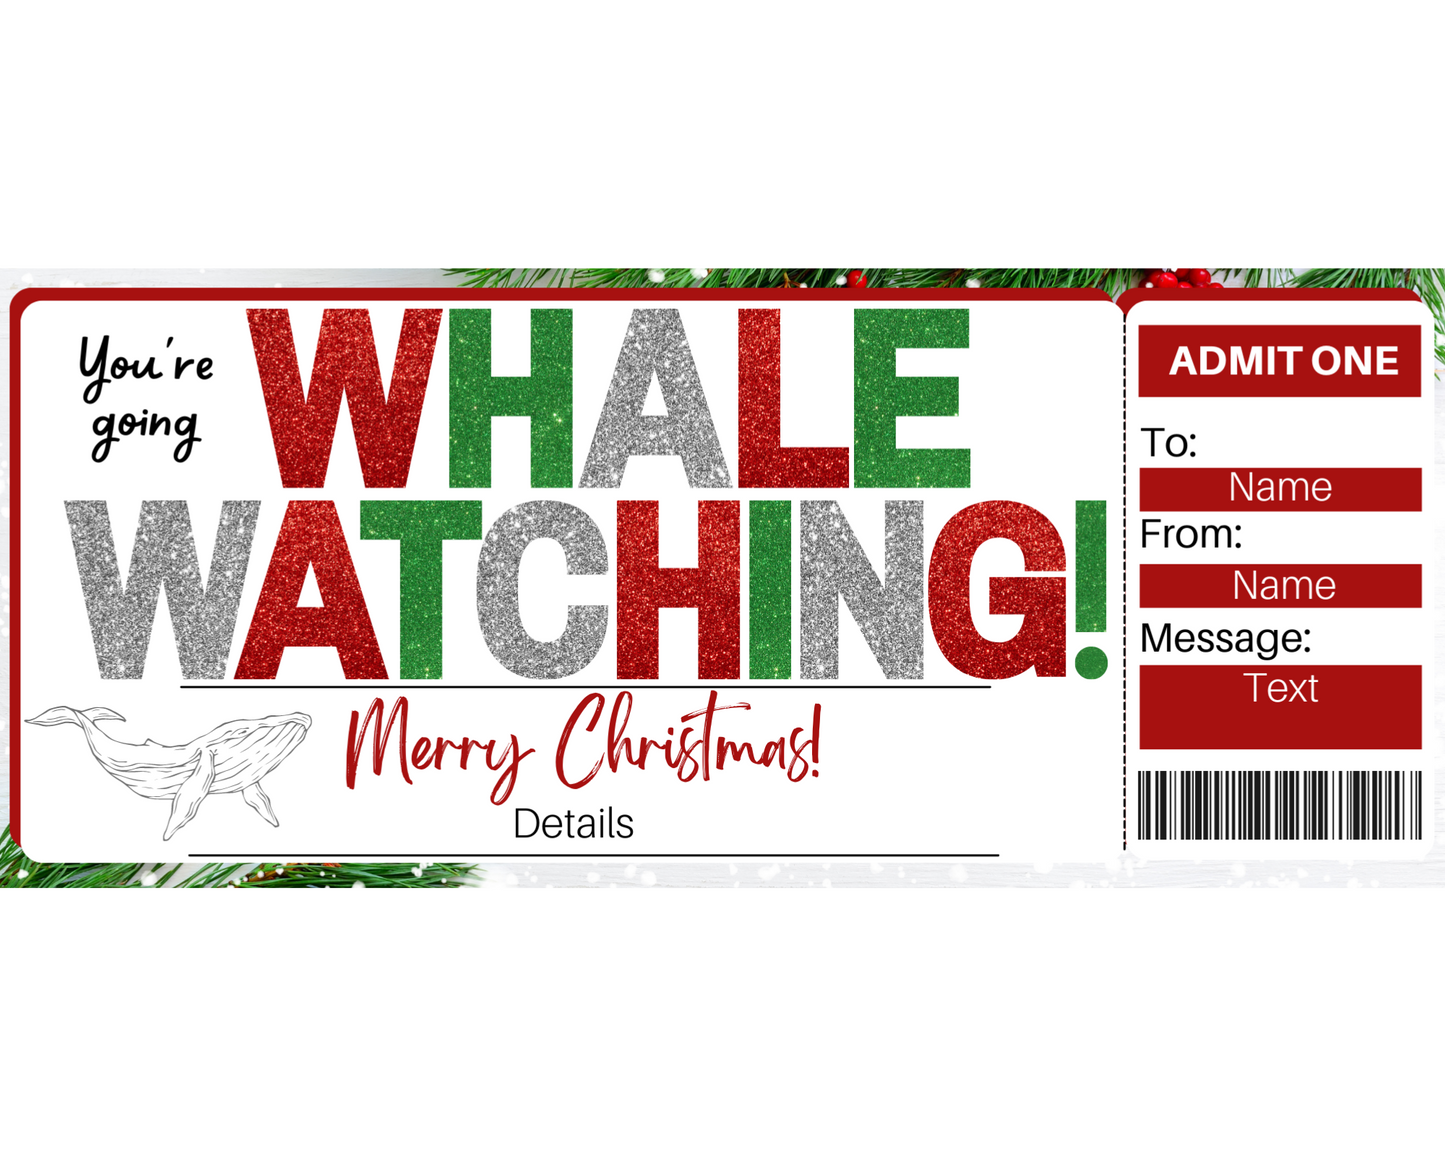 Christmas Whale Watching Gift Ticket Template